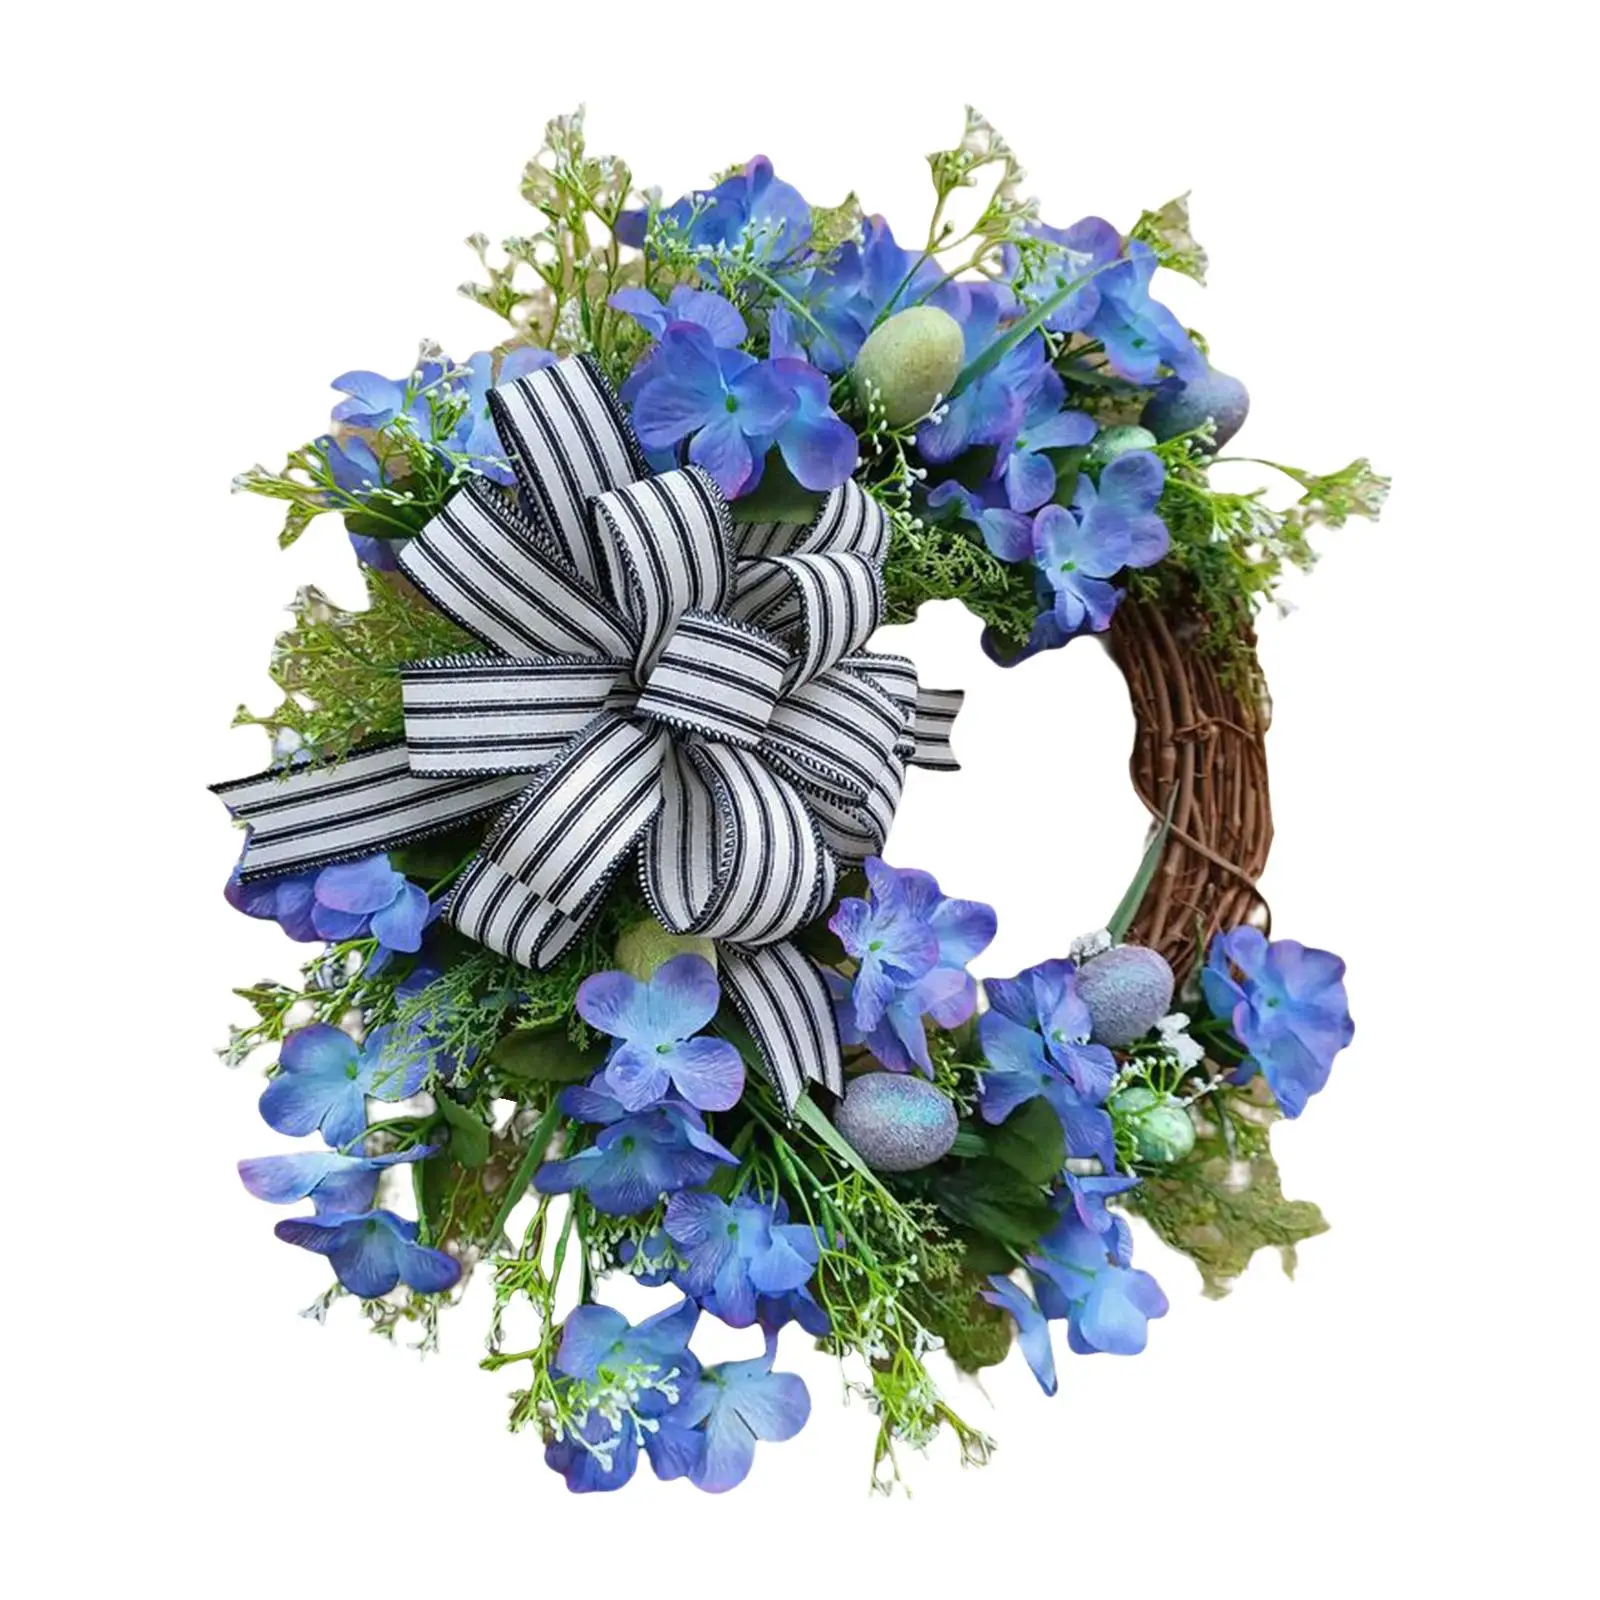 45cm Easter Egg Wreath Garland Greenery Wreaths Hanging Ornament for Celebration Festival Farmhouse Decoration Party Supplies